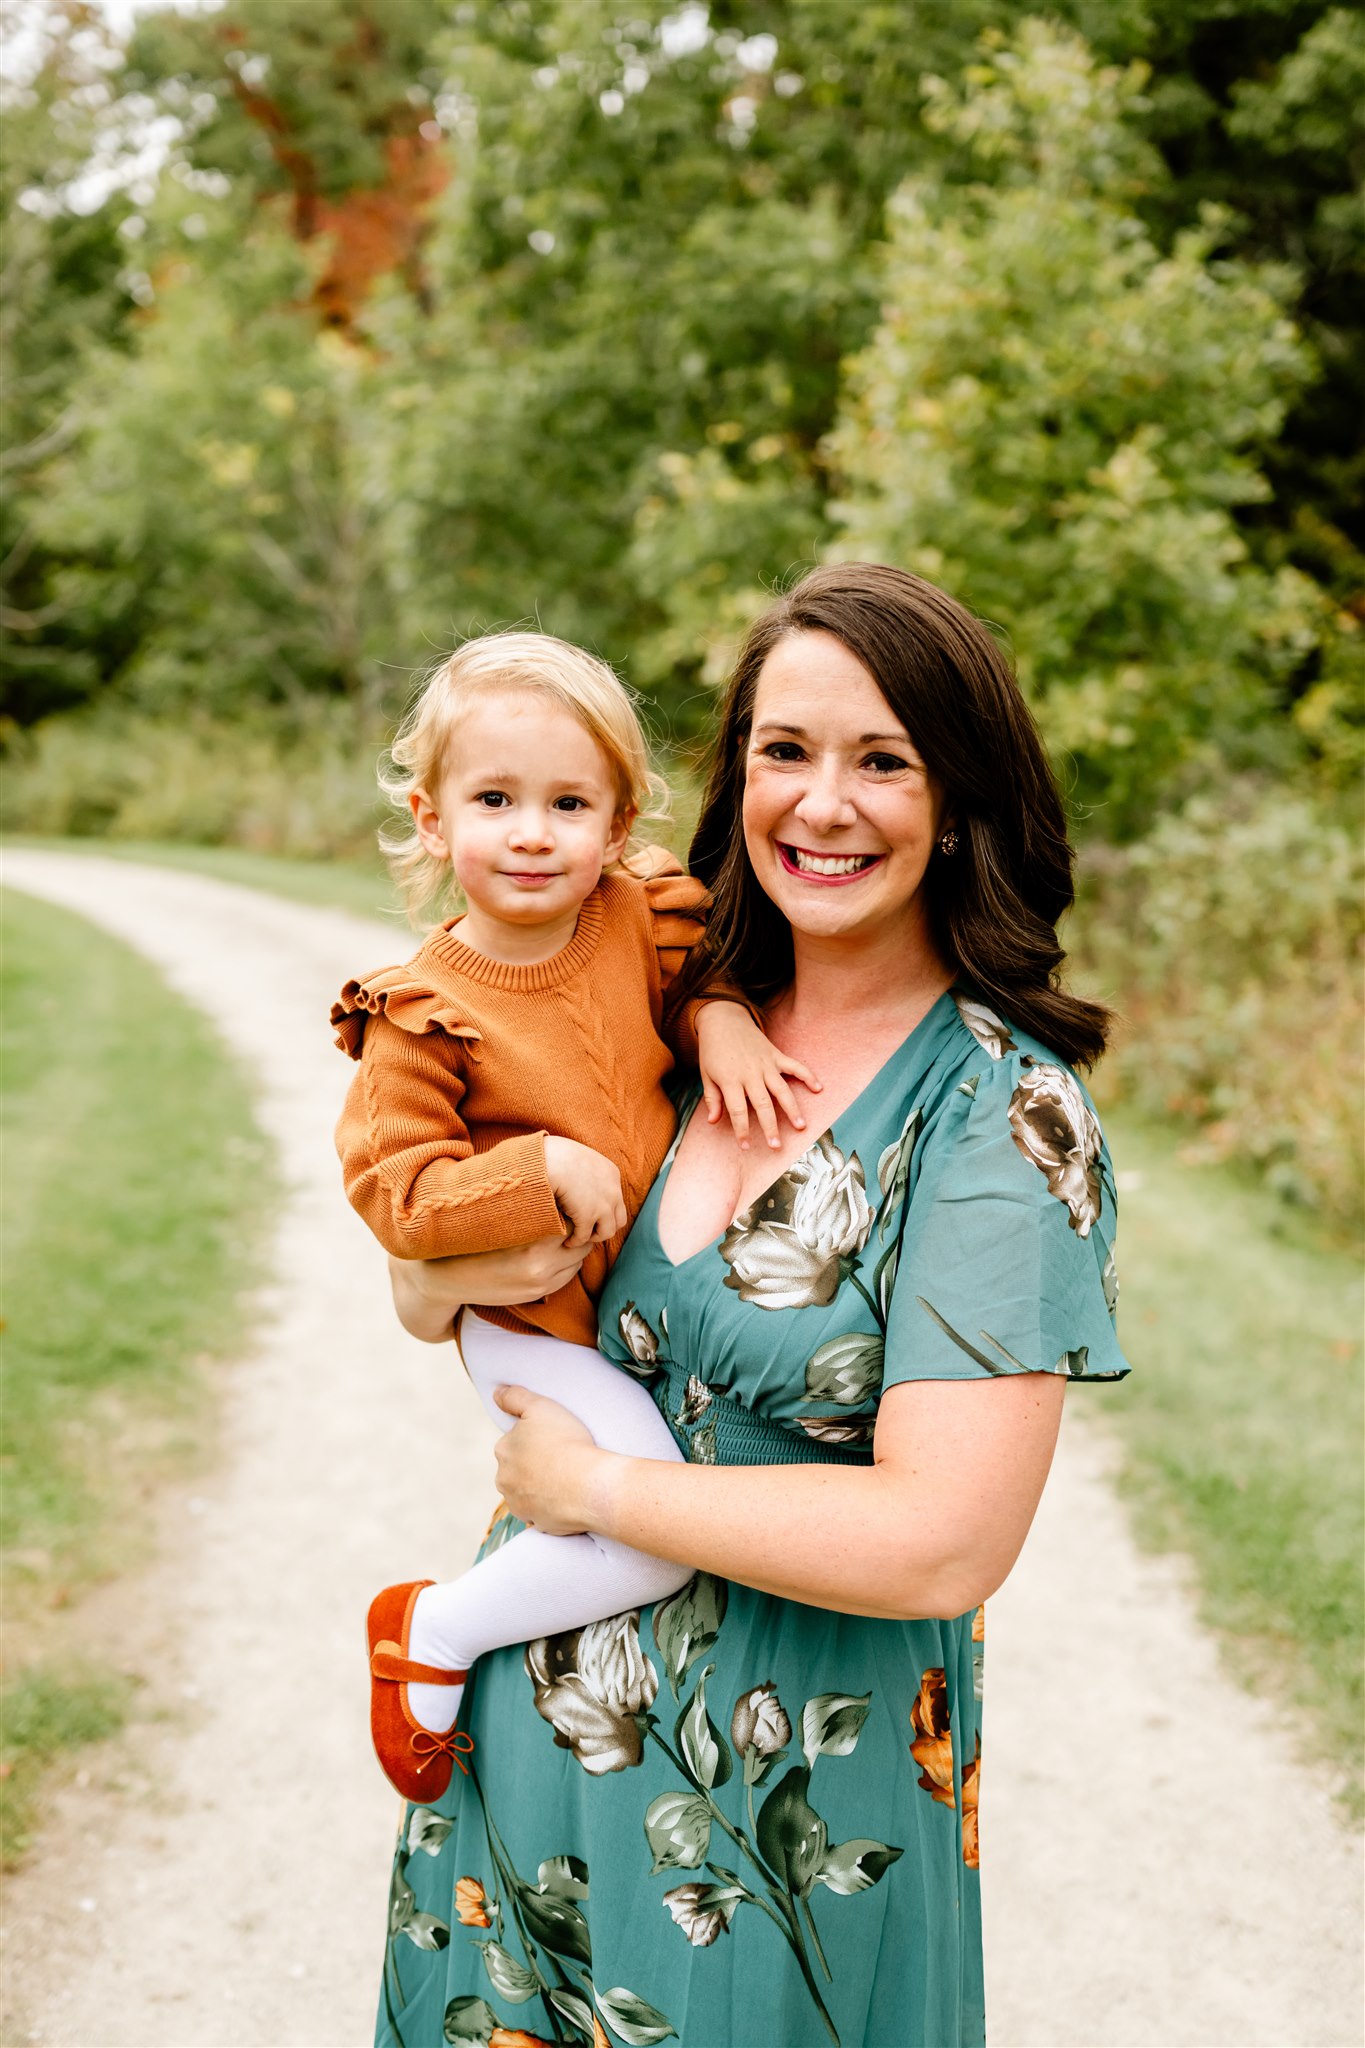 A mother in a teal dress holds her daughter in an orange dress on her hip while walking down a park trail after visiting Kid Birthday Party Ideas Chicago